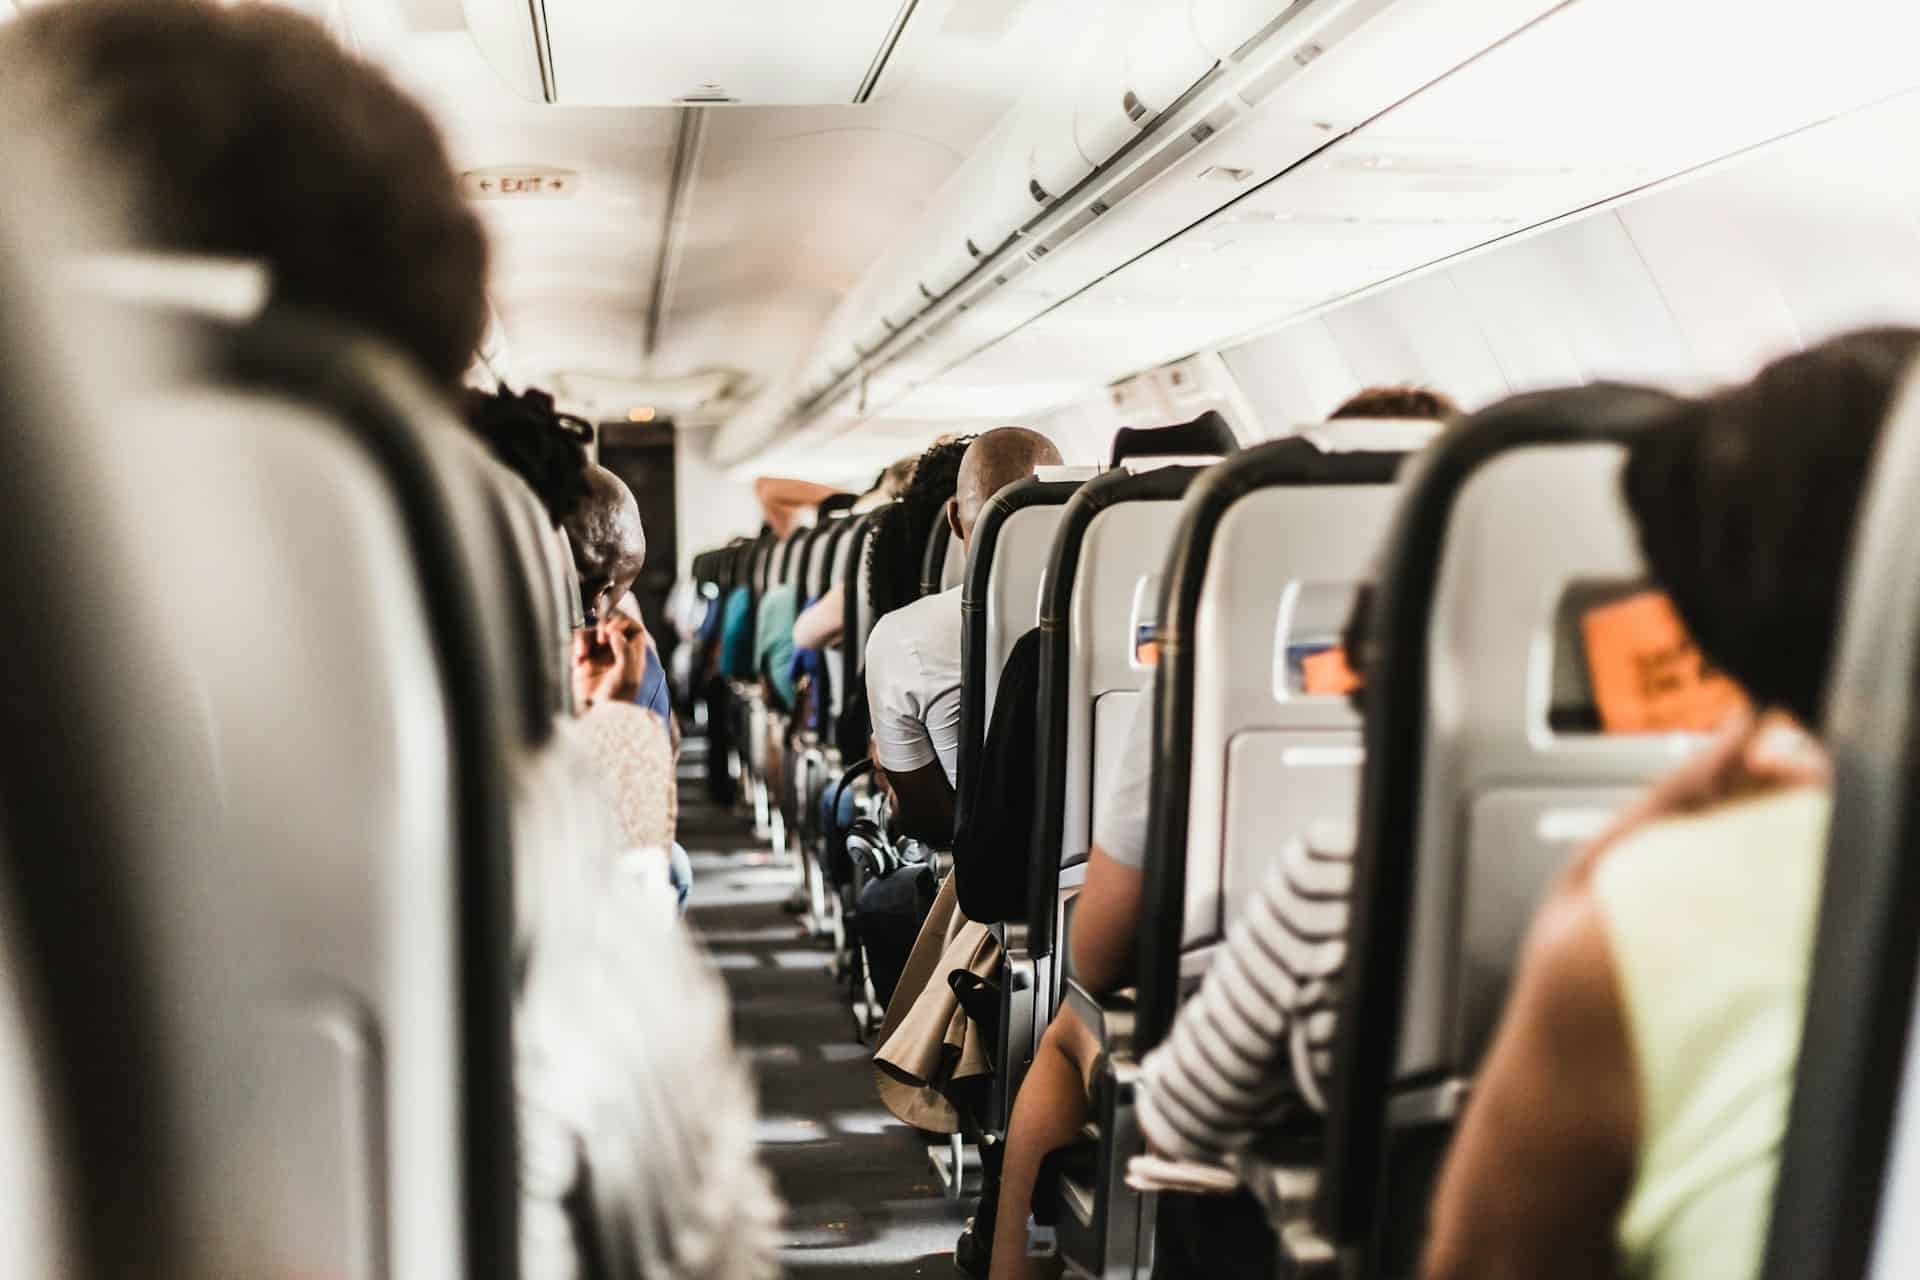 Inside crowded airplane cabin